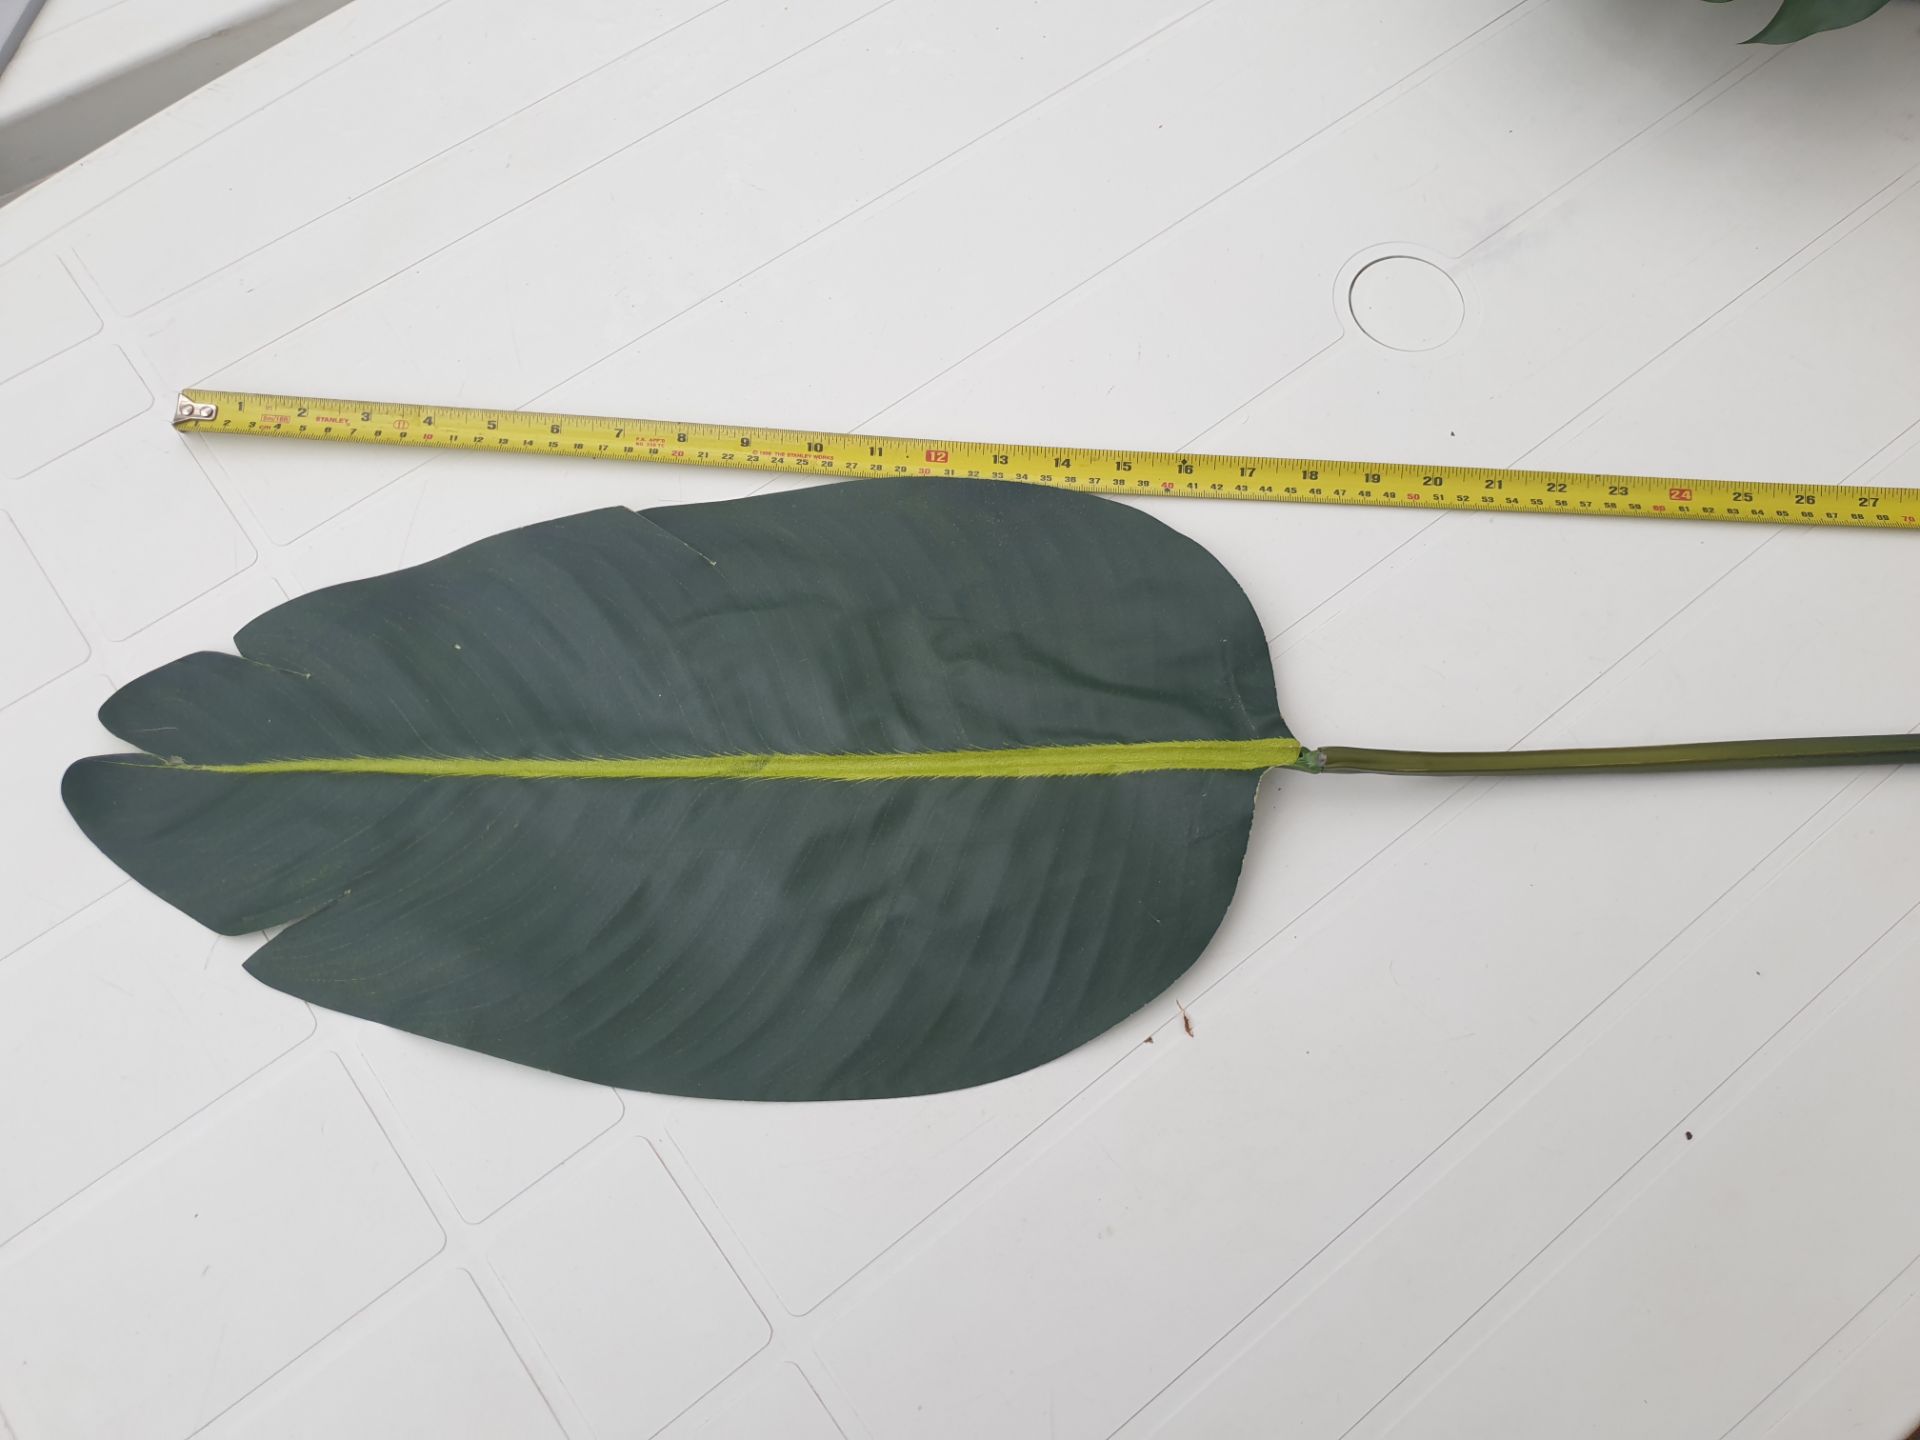 14 x Artificial Banana leaves - Used - Long stems